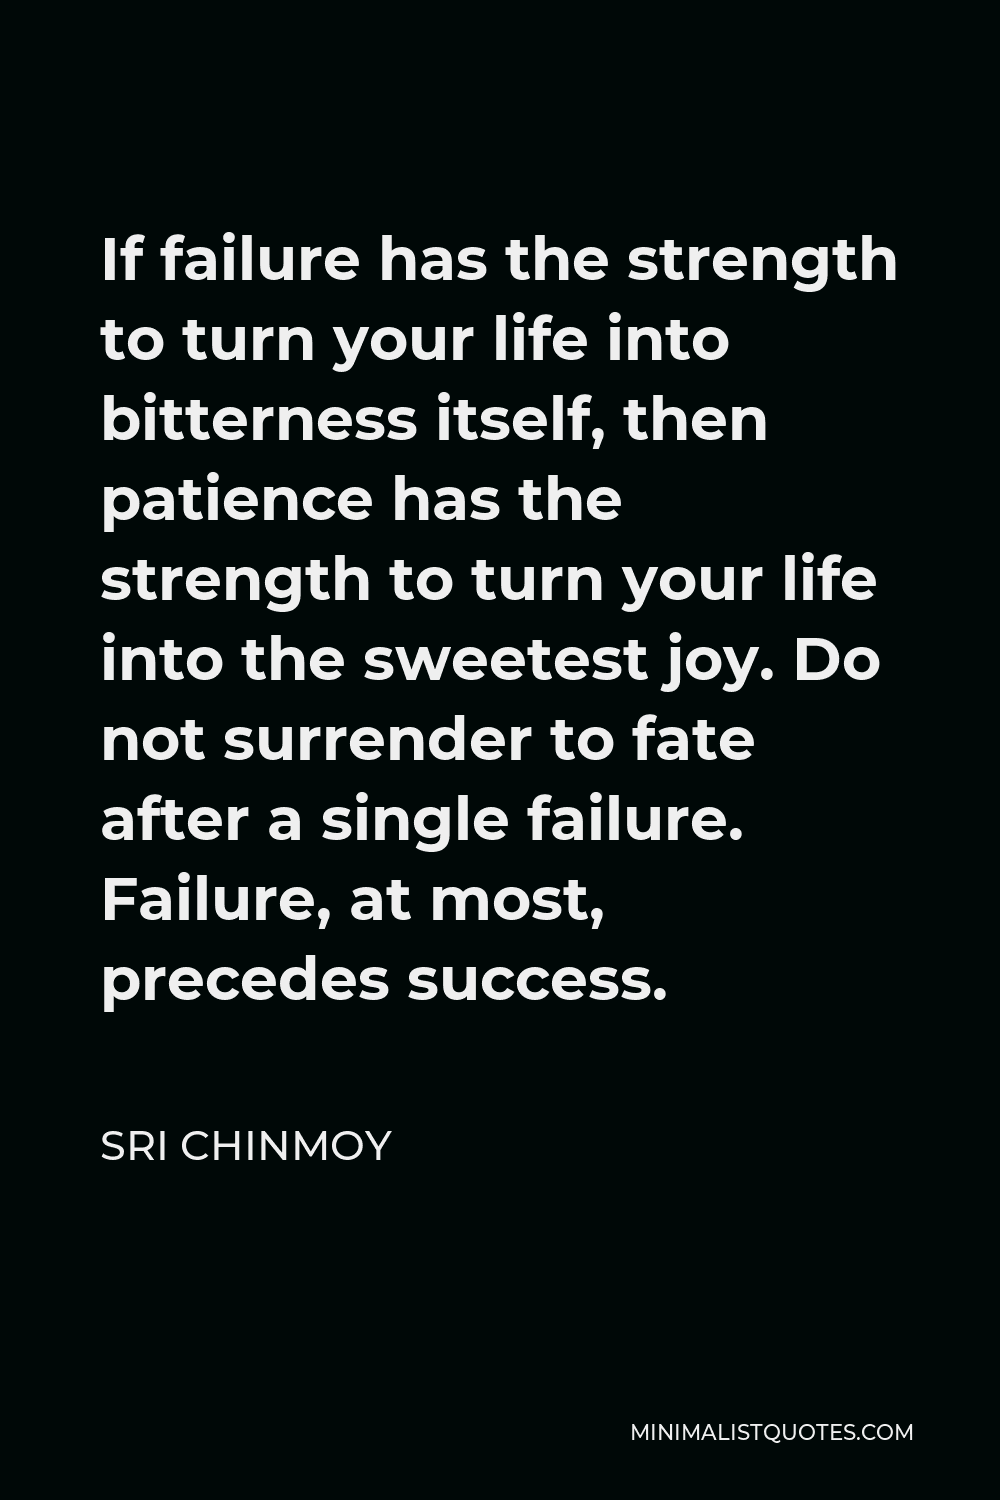 Sri Chinmoy Quote - If failure has the strength to turn your life into bitterness itself, then patience has the strength to turn your life into the sweetest joy. Do not surrender to fate after a single failure. Failure, at most, precedes success.